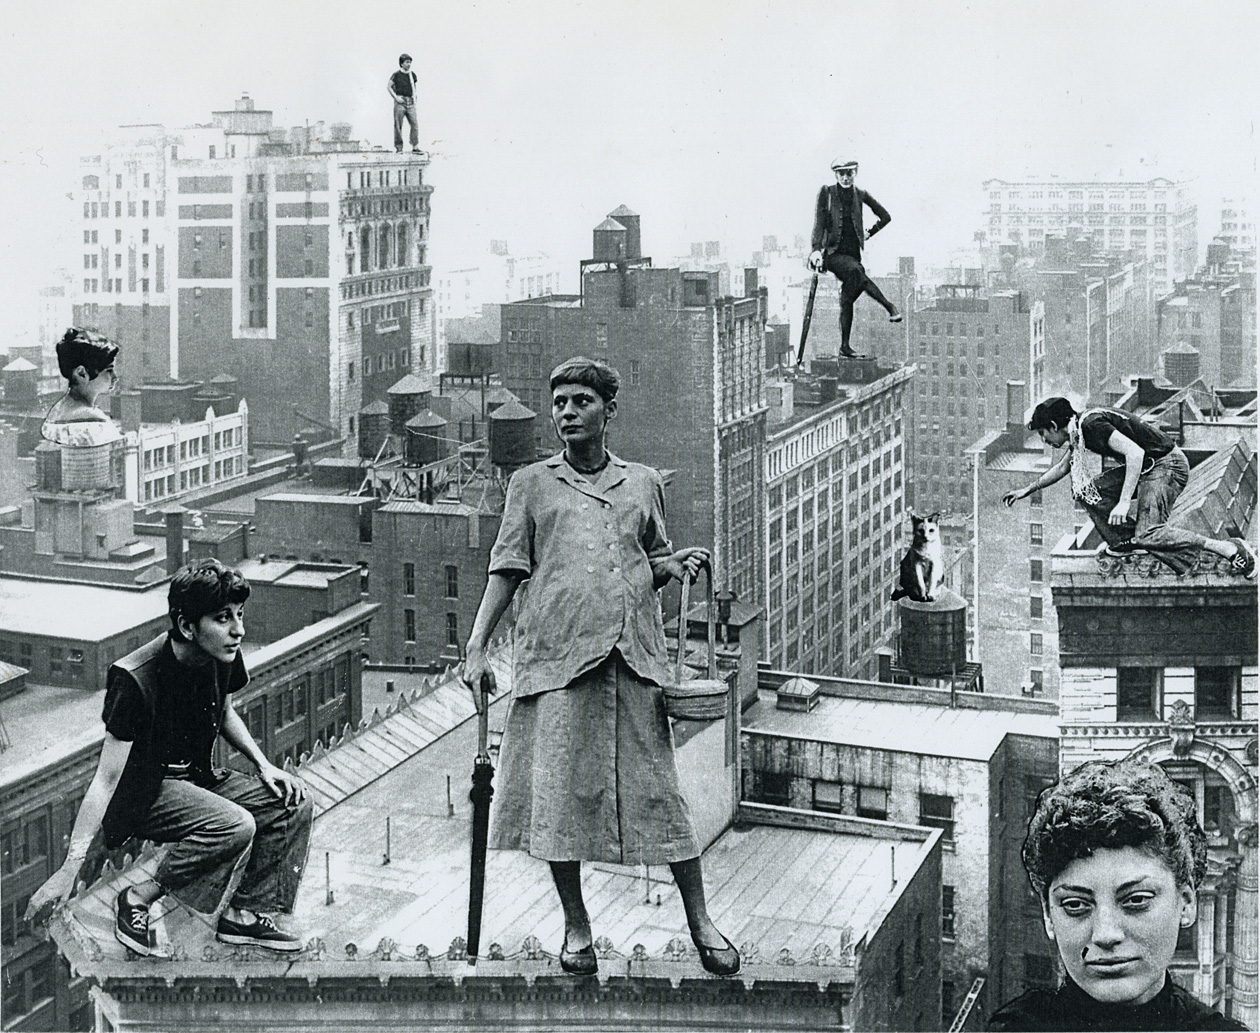 Rudy Burckhardt photomontage “Over the Roofs of Chelsea” created in 1949 for the exhibition with Helen DeMott, Lucia Vernarelli and Edith Schloss Burckhardt at the Pyramid Gallery in New York City. The three close friends were called “Chelsea Girls” by Edwin Denby. Foreground: DeMott, Schloss (pregnant with her son Jacob Burckhardt), and Vernarelli. From the Edith Schloss Burckhardt Archive.